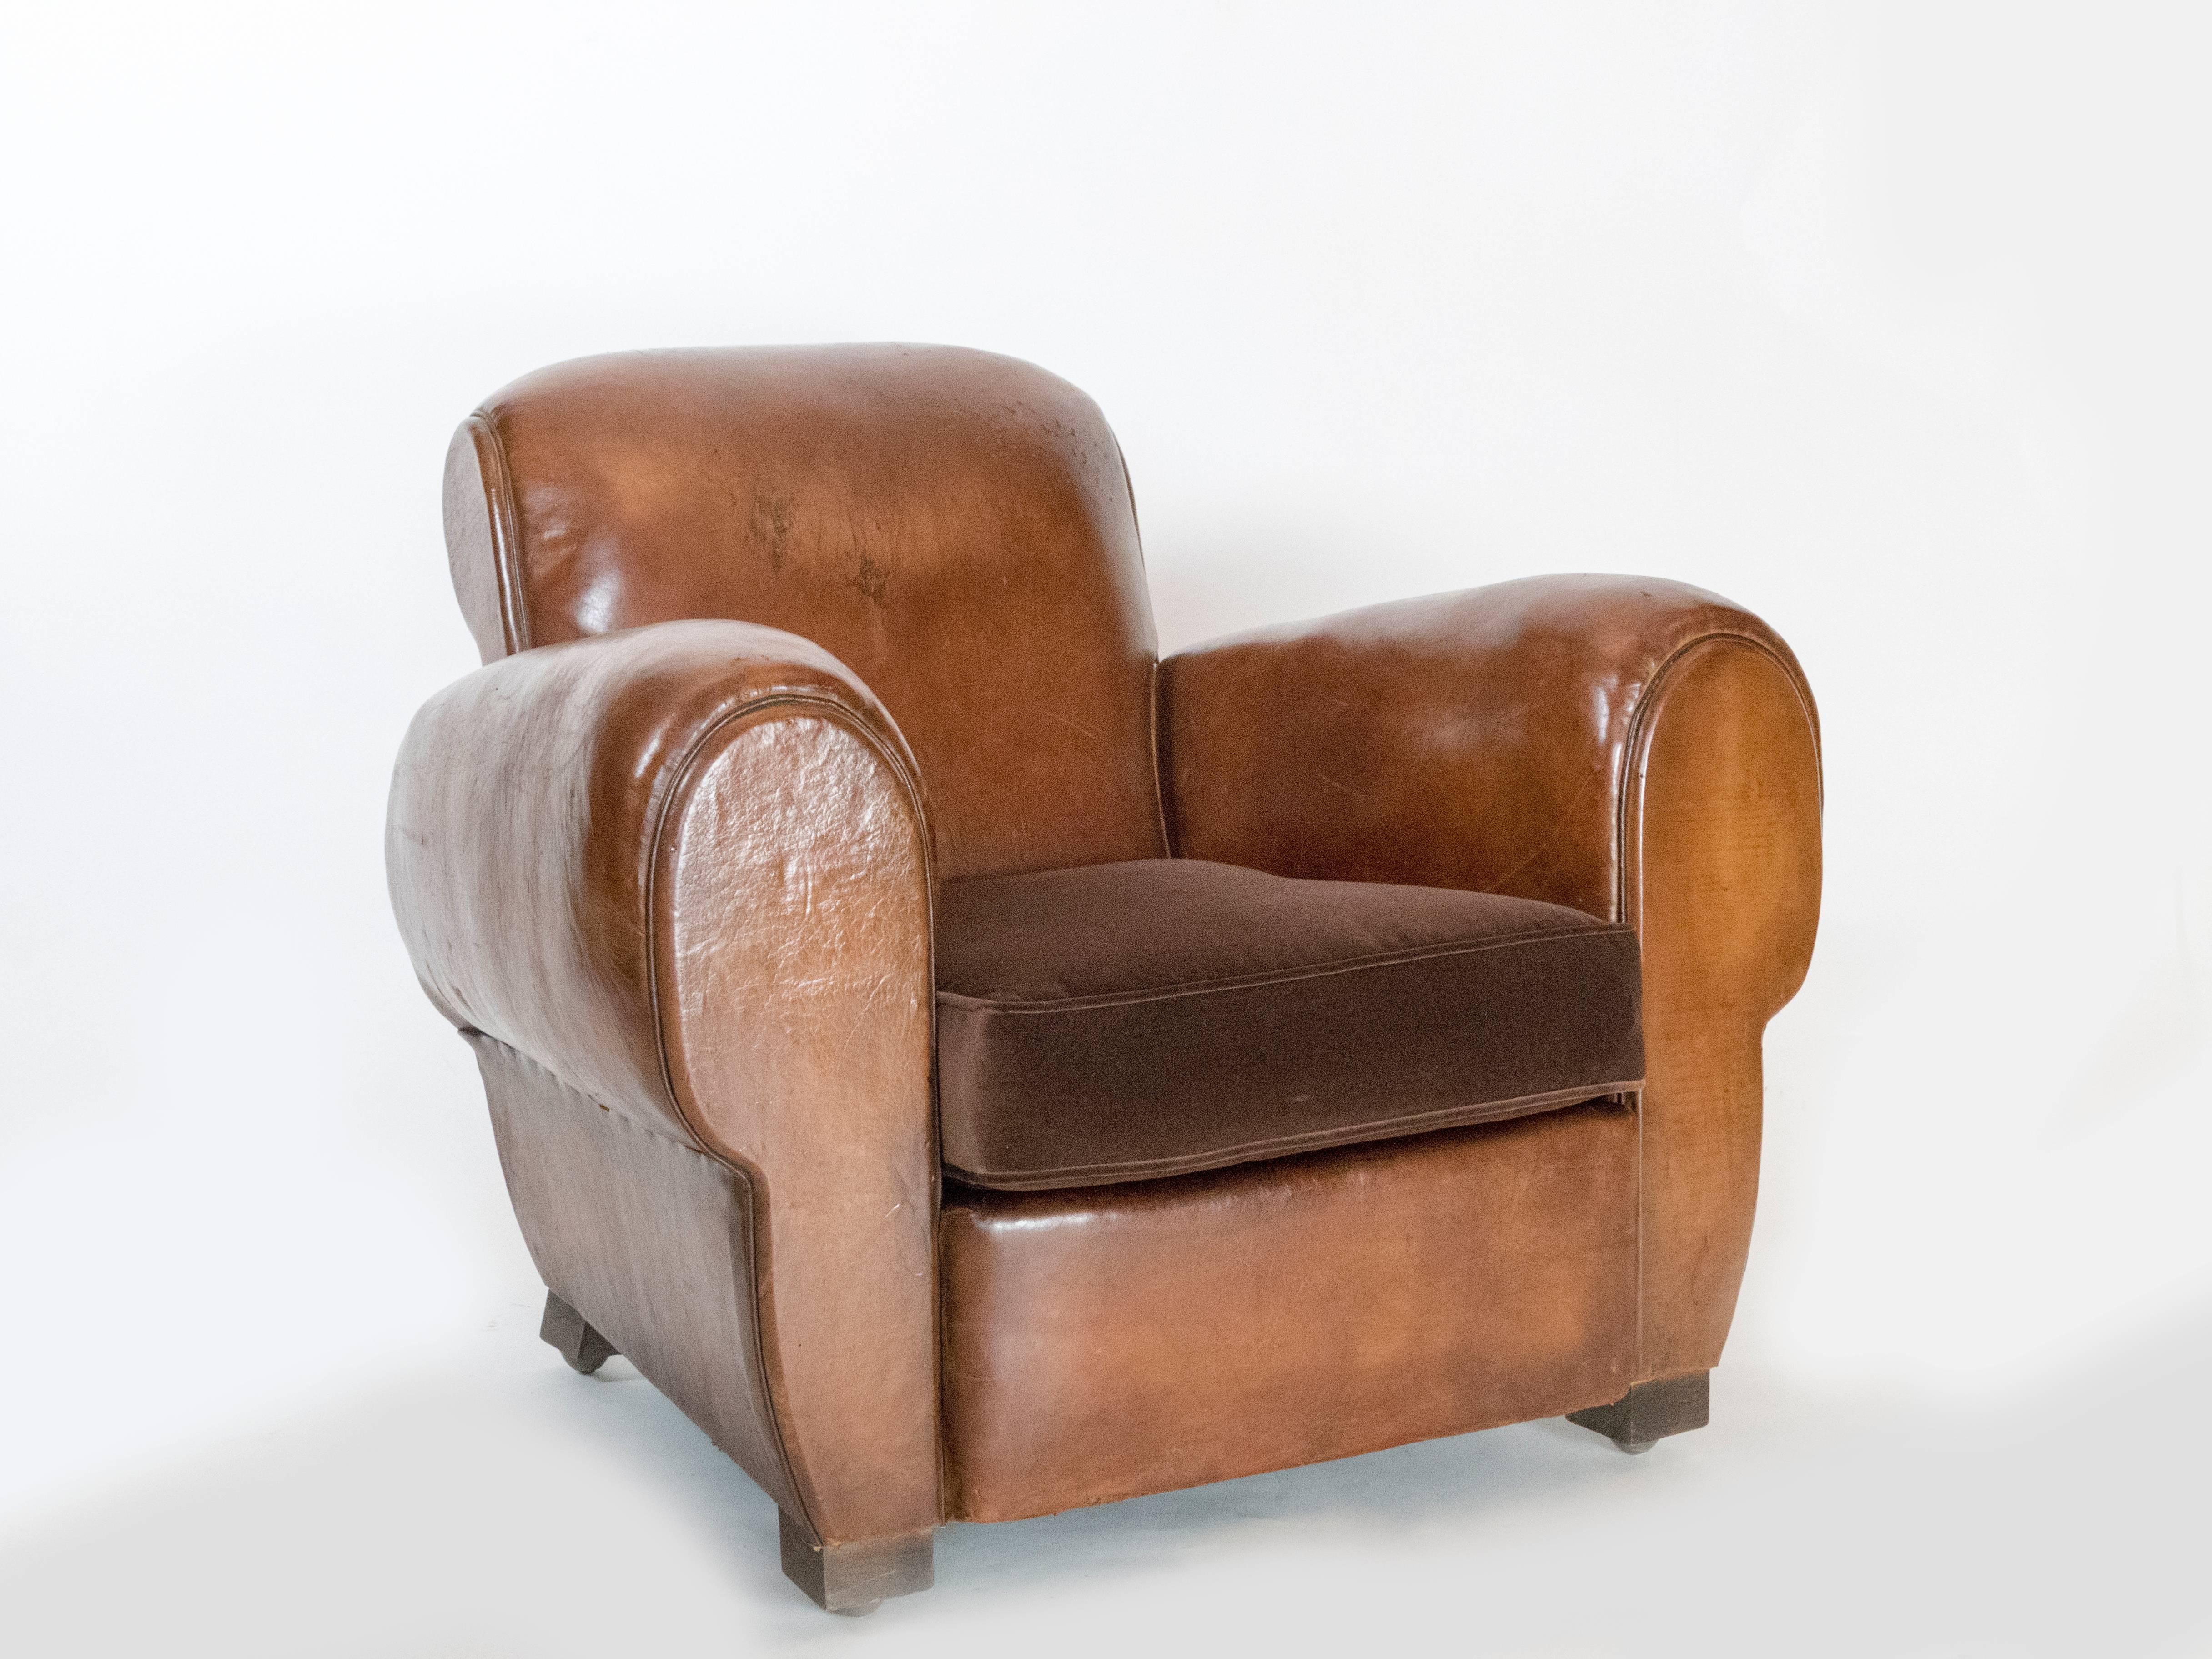 French 1930s club chairs. Beautiful leather patina. The two cotton velvet cushions are newly done with a down cushion. The structure has been re-inforced. They are very comfortable and have vintage wheels on the feet.